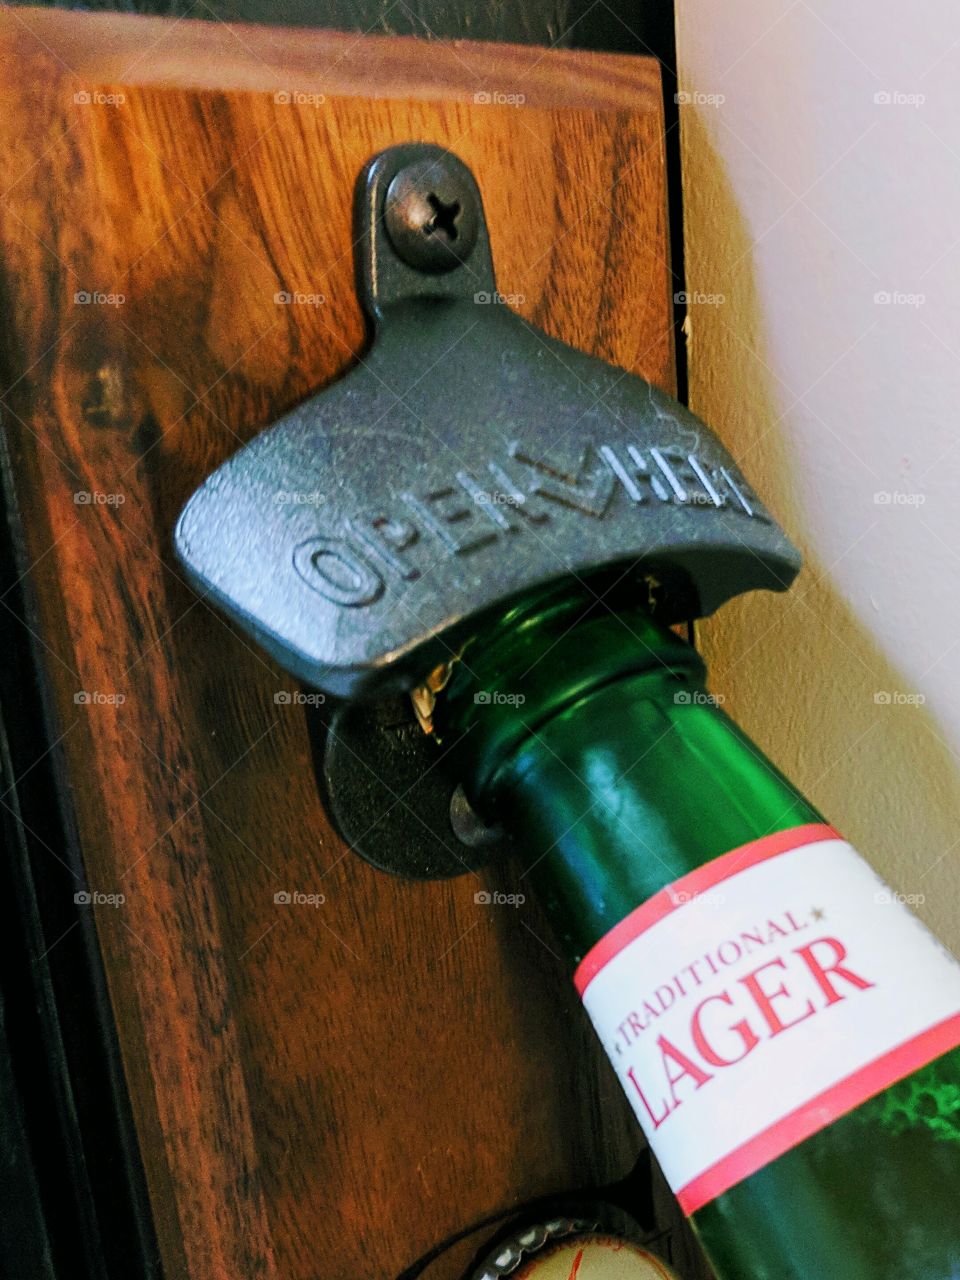 Opening a traditional lager beer bottle